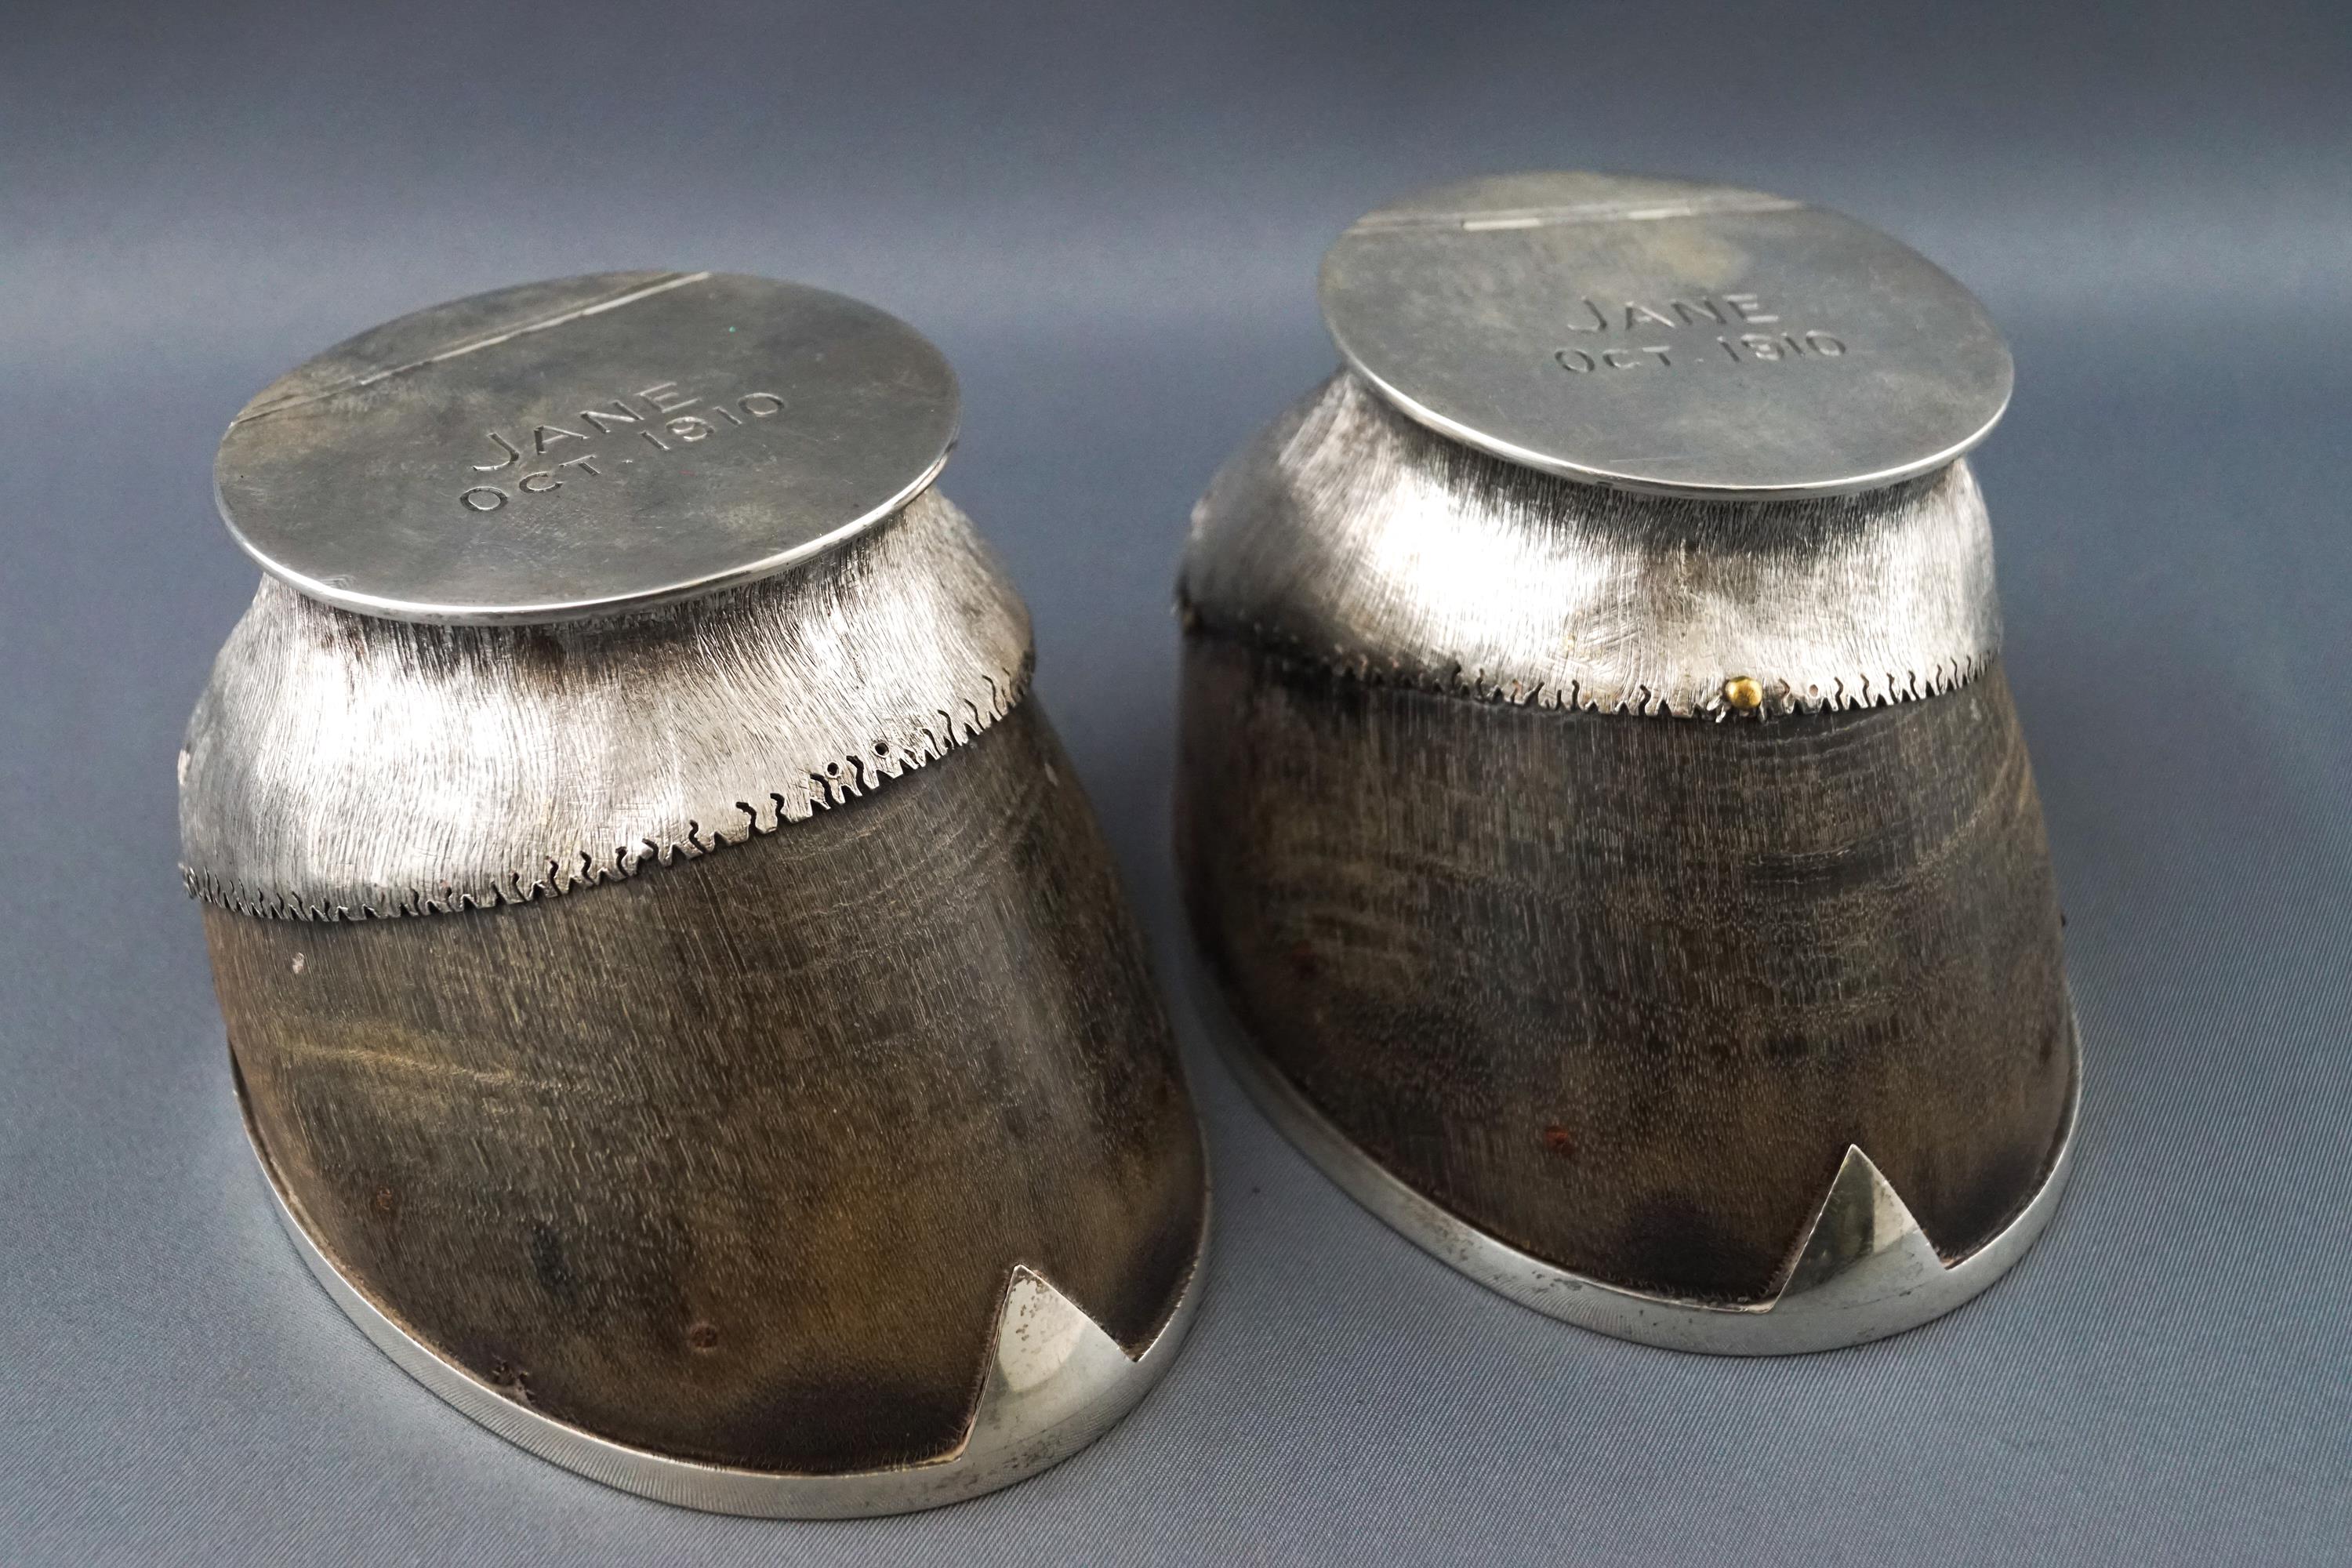 A pair of silver mounted donkey hoof inkwells, the lids engraved "Jane Oct 1910", London, 1910,